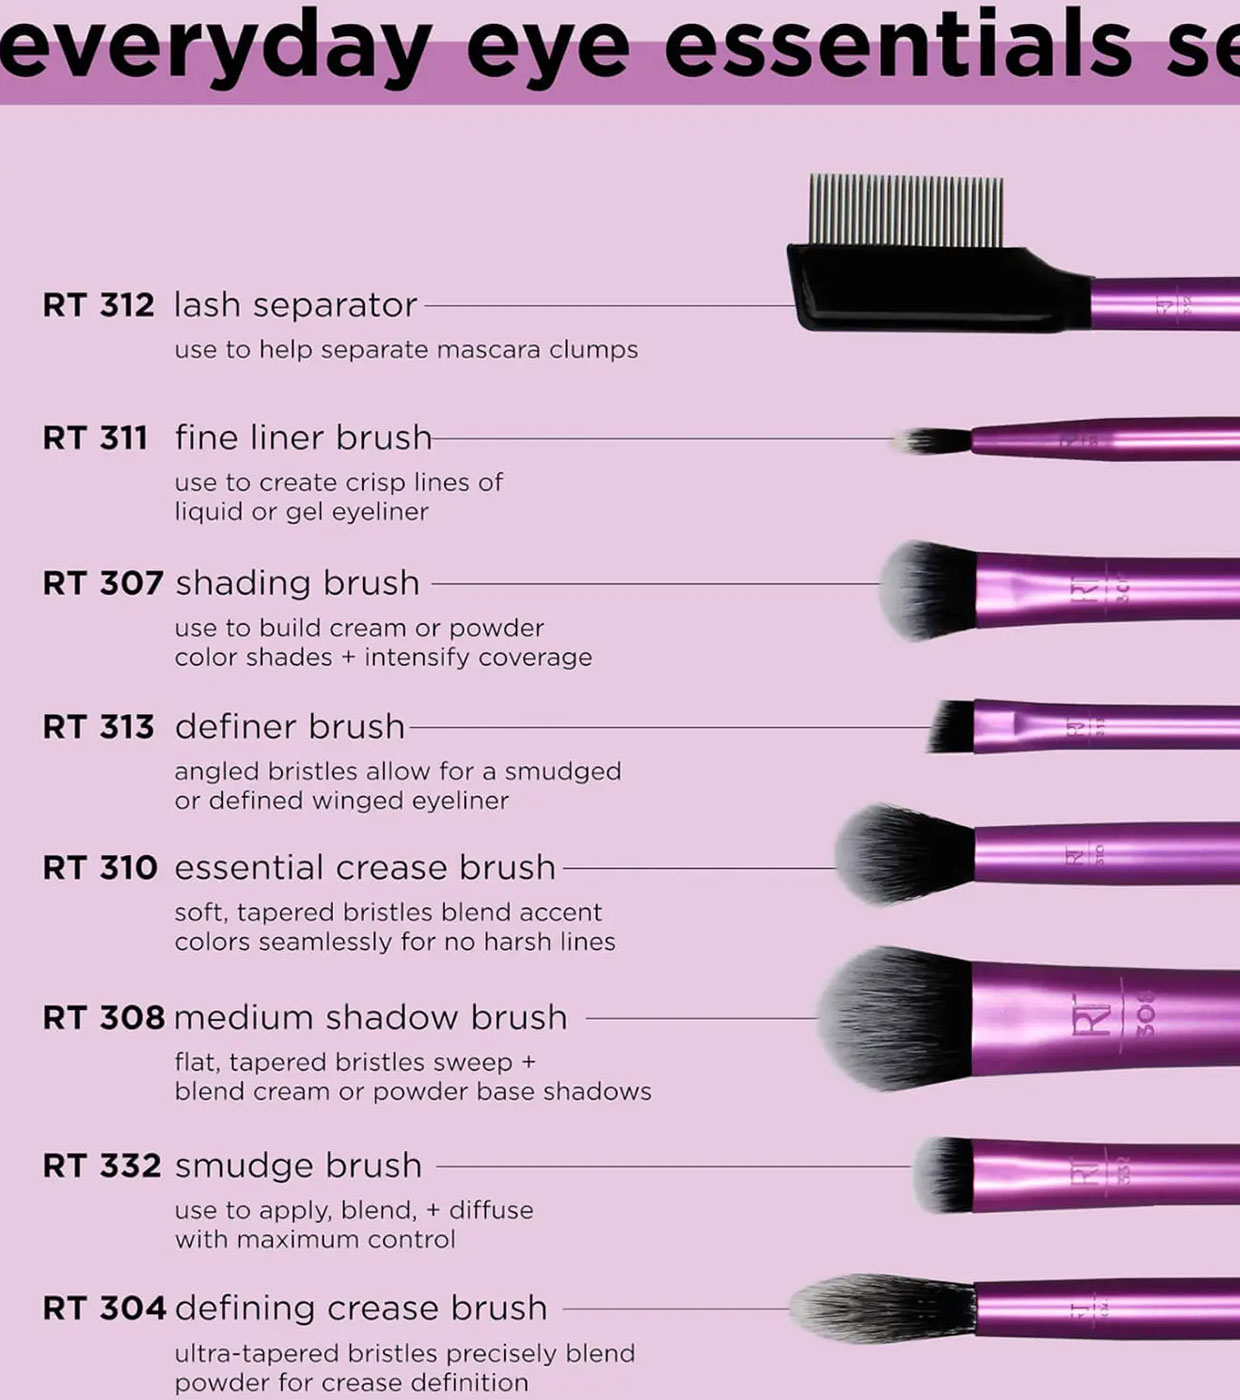 Real Techniques, Makeup Brushes & Sets